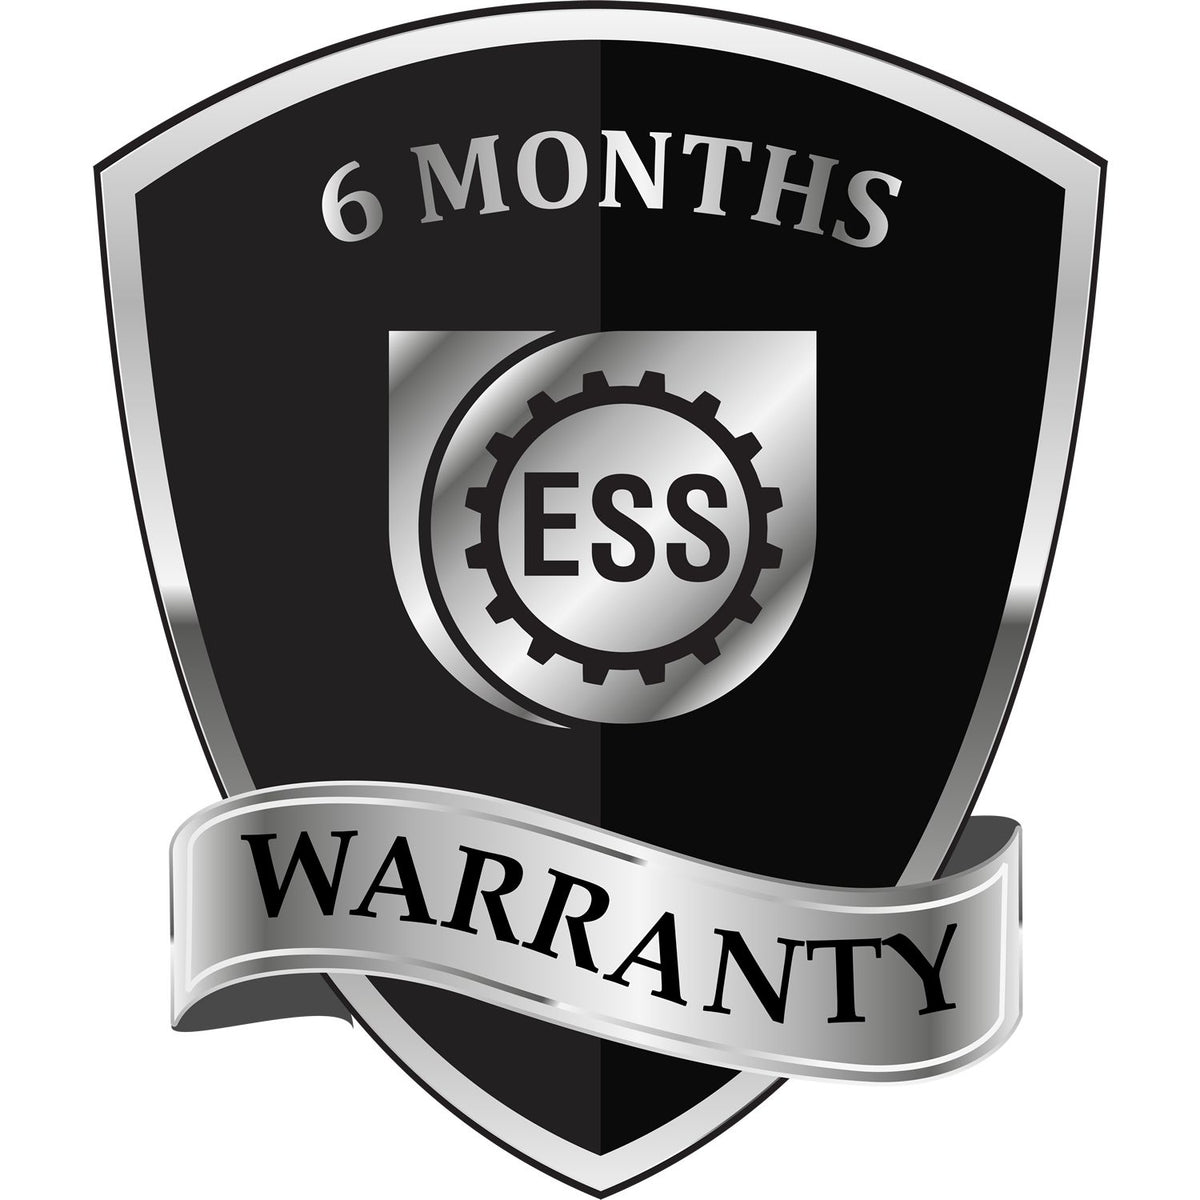 A badge or emblem showing a warranty icon for the PSI Ohio Notary Stamp